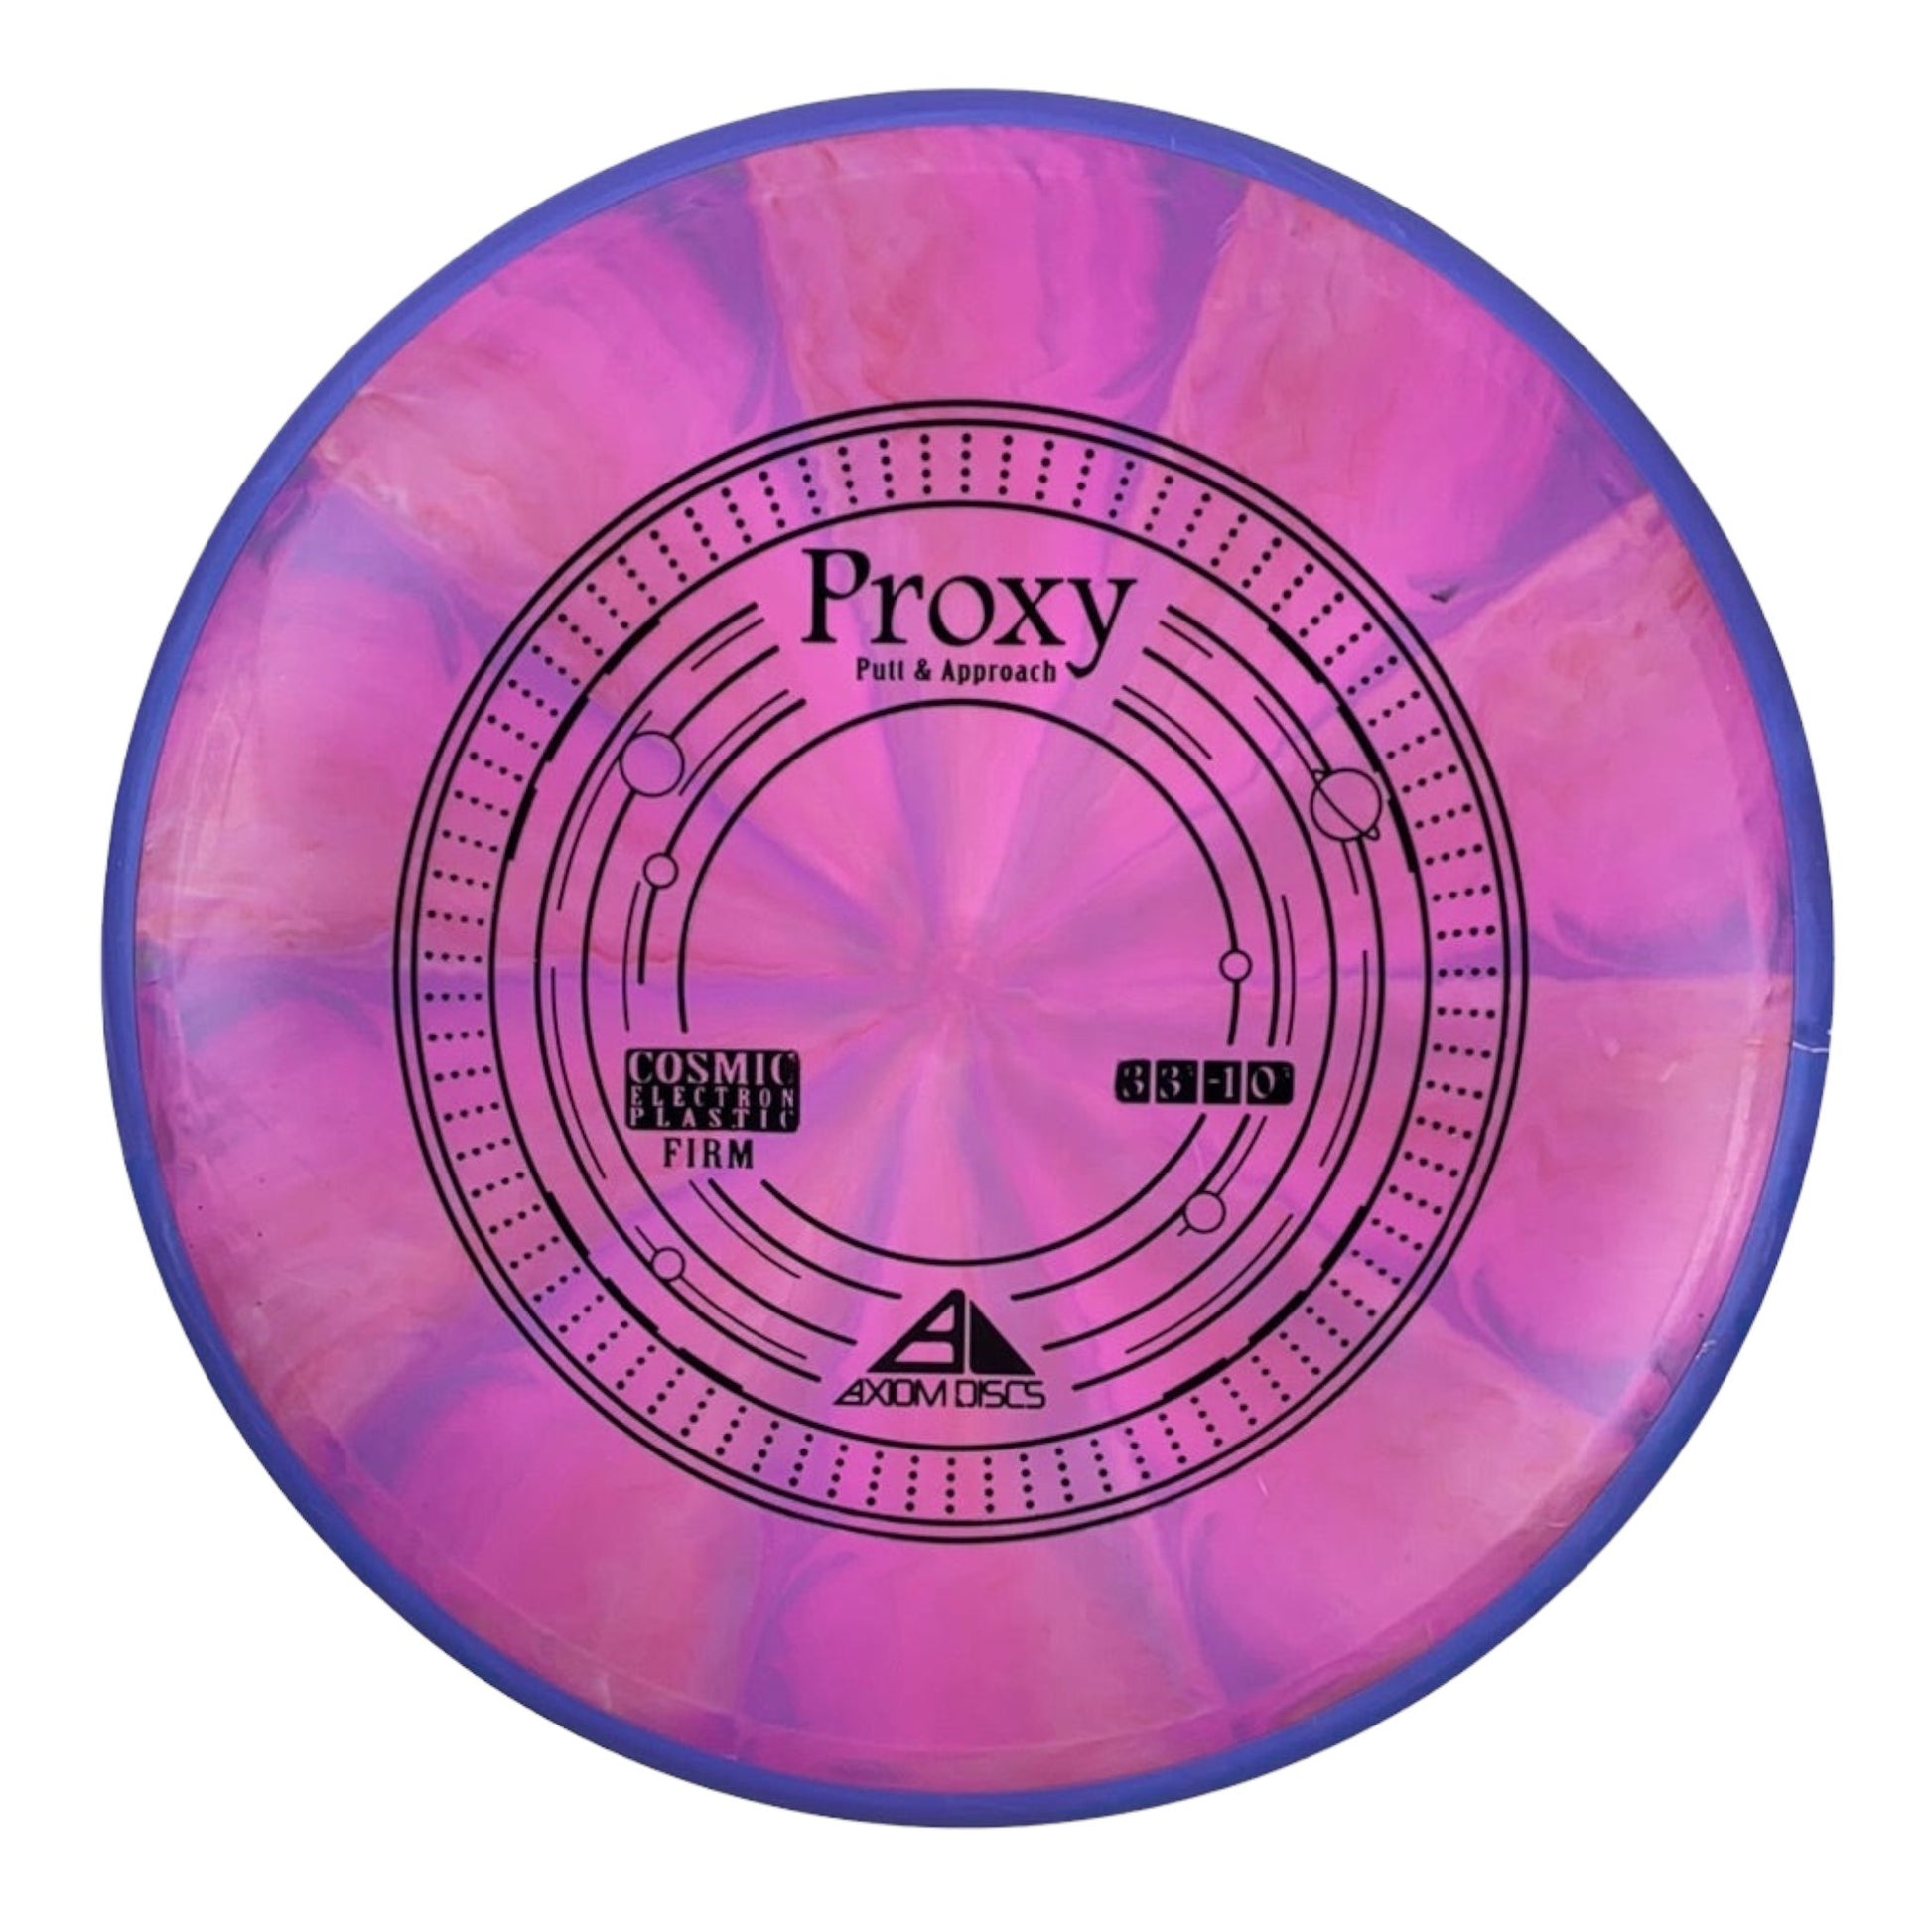 Axiom Discs Proxy | Cosmic Electron Firm | Pink/Blue 173g